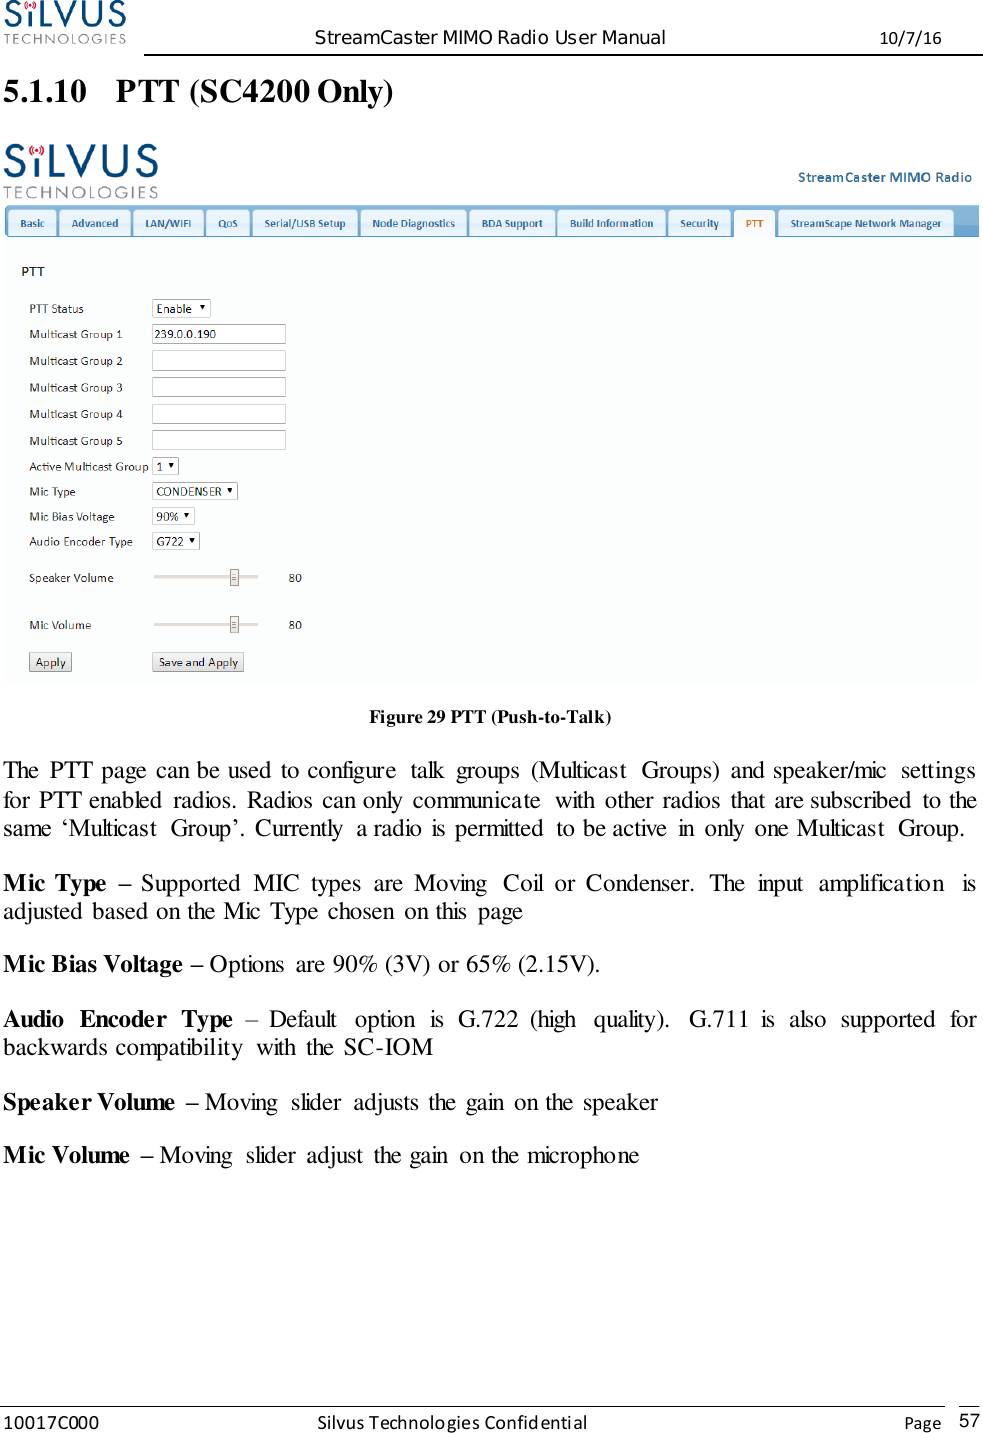  StreamCaster MIMO Radio User Manual  10/7/16 10017C000 Silvus Technologies Confidential    Page   57 5.1.10 PTT (SC4200 Only)  Figure 29 PTT (Push-to-Talk) The  PTT page can be used to configure  talk  groups  (Multicast  Groups)  and speaker/mic  settings for PTT enabled  radios. Radios can only  communicate  with  other radios  that are subscribed  to the same  ‘Multicast  Group’. Currently  a radio is permitted  to be active  in  only  one Multicast  Group. Mic Type  – Supported  MIC  types  are  Moving  Coil  or  Condenser.  The  input  amplification  is adjusted based on the Mic Type chosen  on this  page Mic Bias Voltage – Options  are 90% (3V) or 65% (2.15V). Audio  Encoder  Type –  Default  option  is  G.722  (high  quality).  G.711  is  also  supported  for backwards compatibility  with  the SC-IOM Speaker Volume – Moving  slider  adjusts the gain  on the speaker Mic Volume – Moving  slider  adjust  the gain  on the microphone  